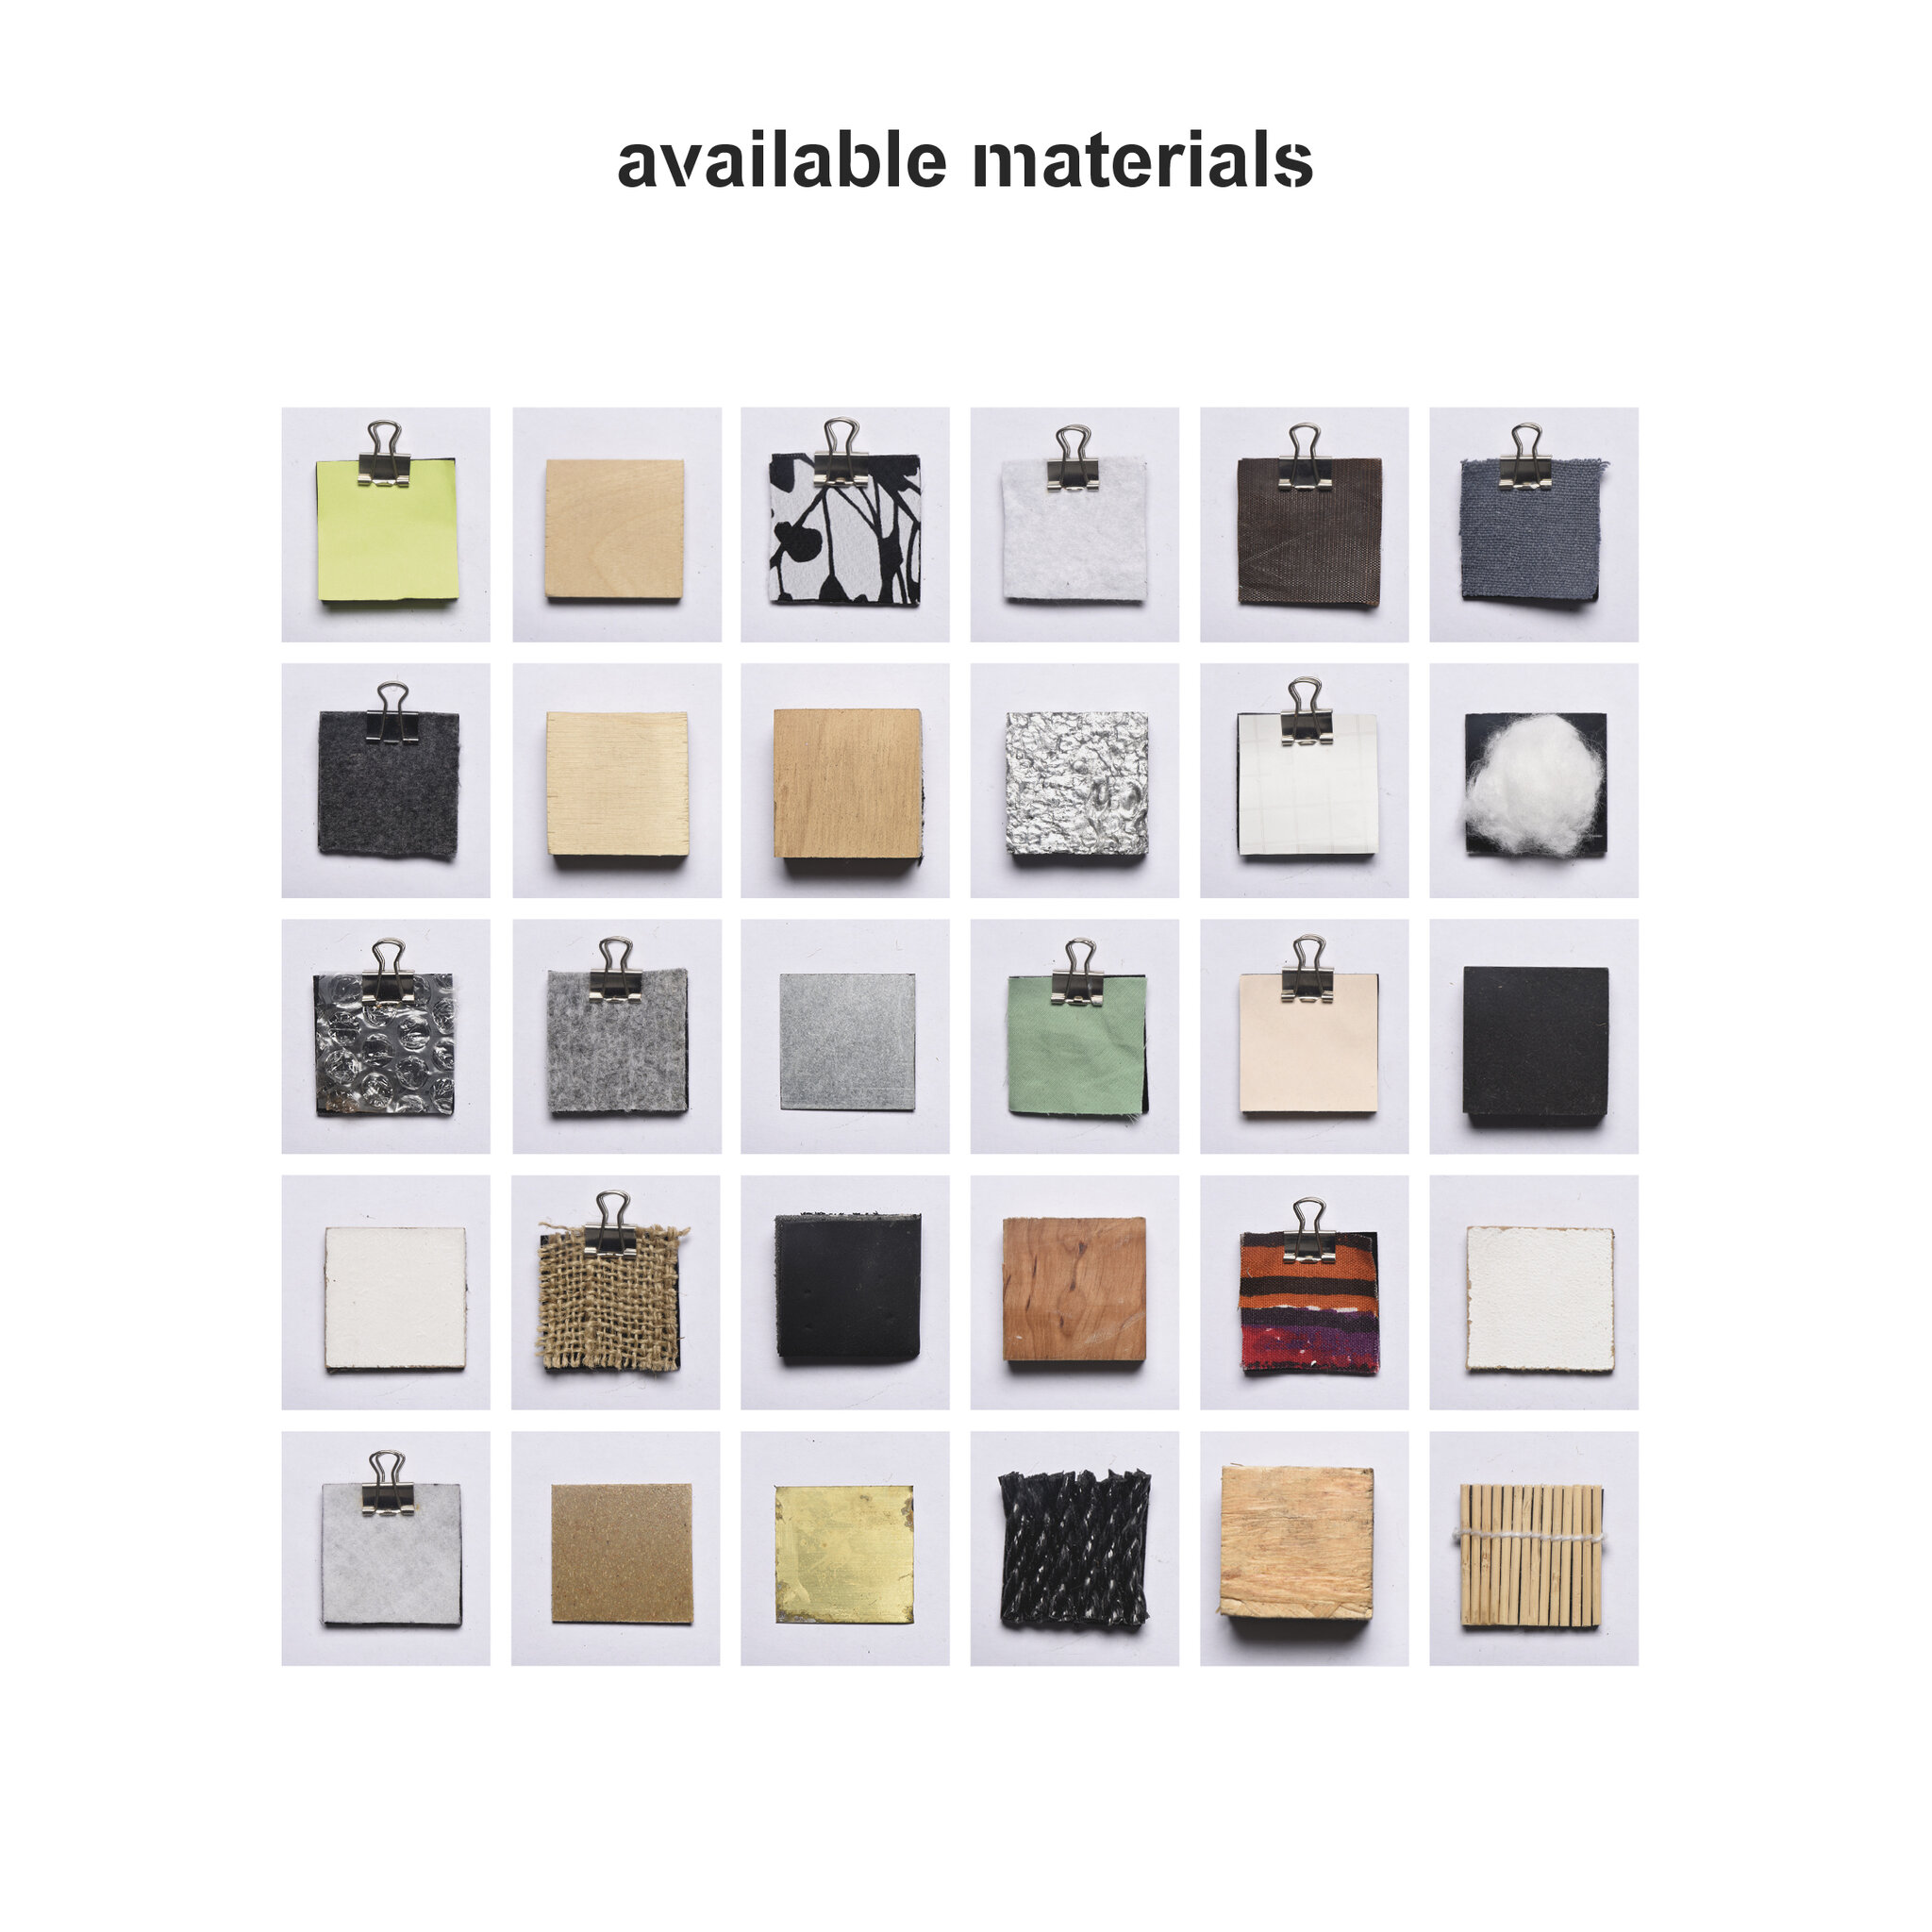 available materials - samples